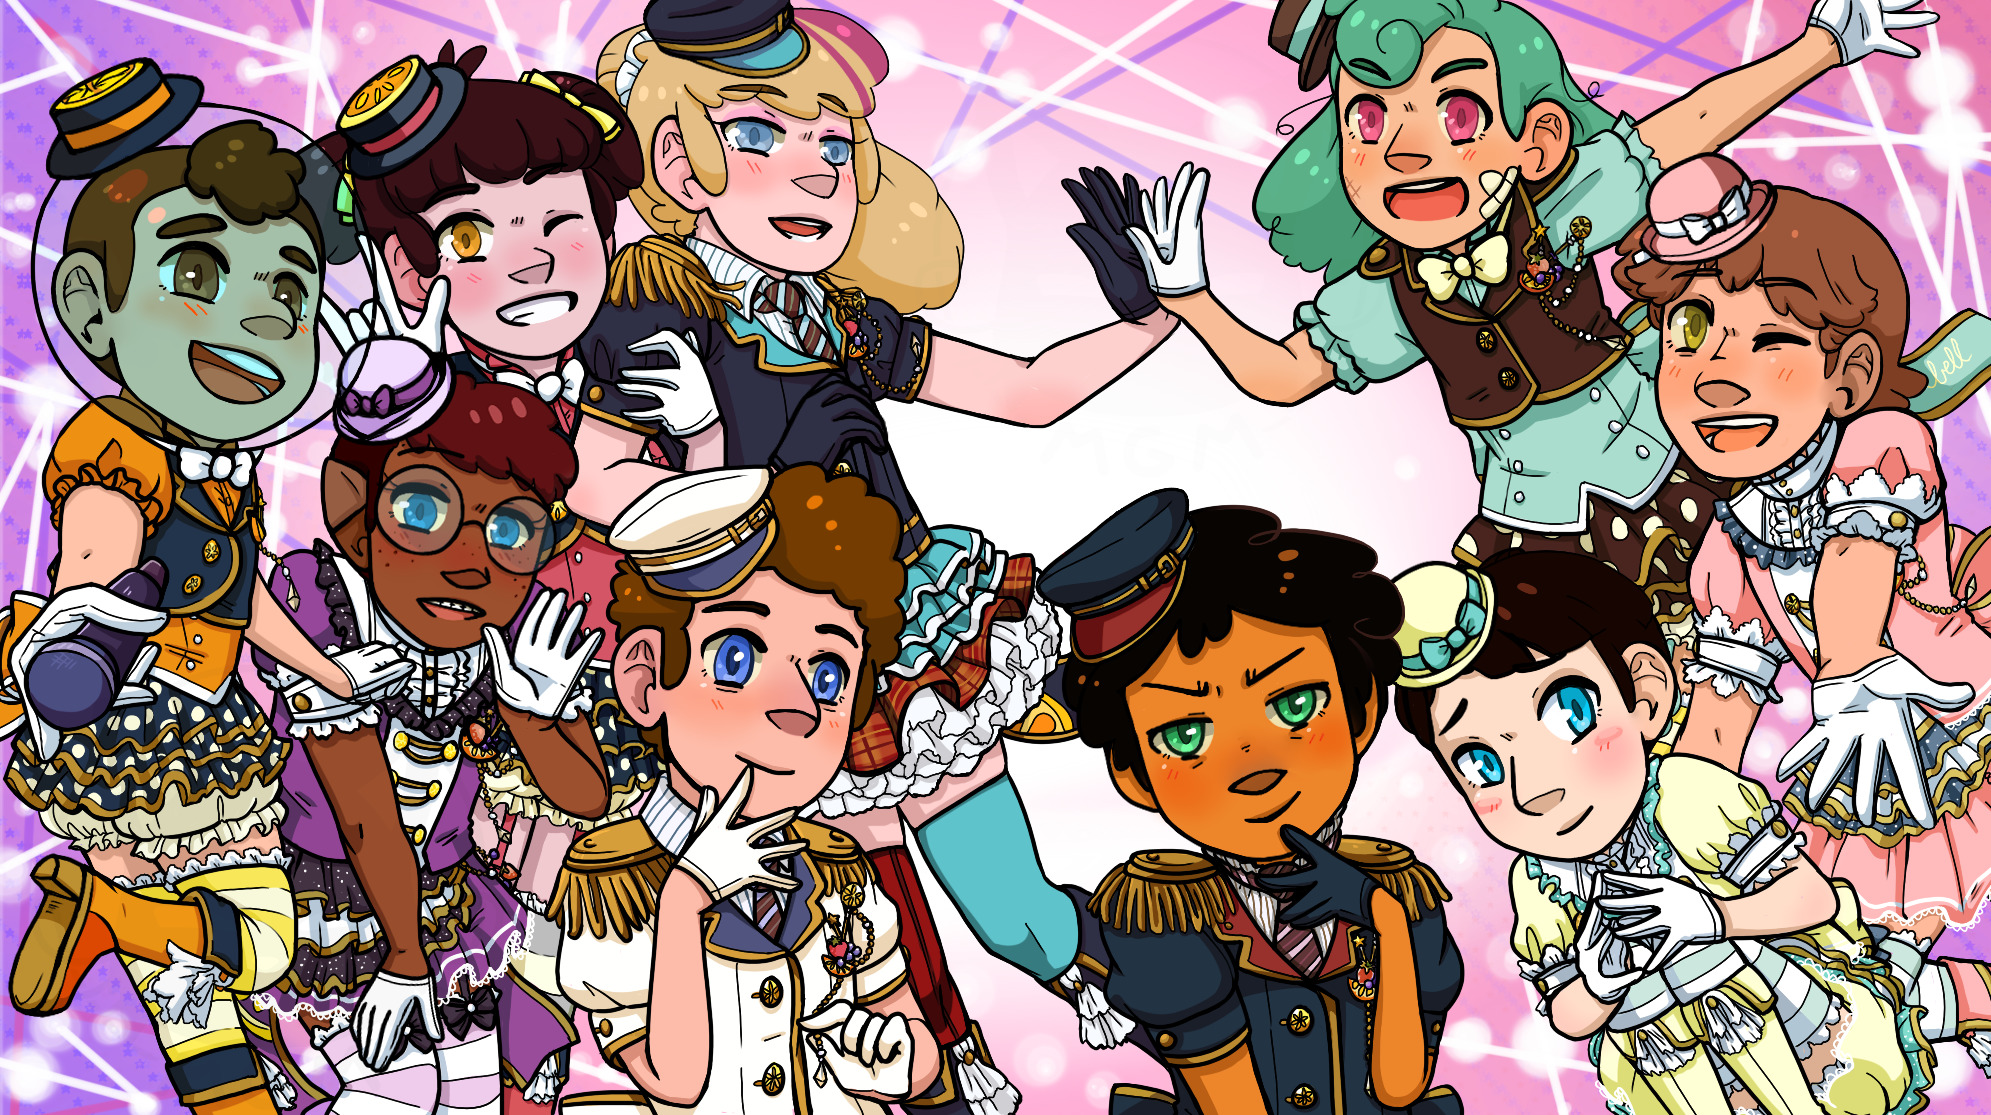 A bunch of cartoon-like sparkly characters